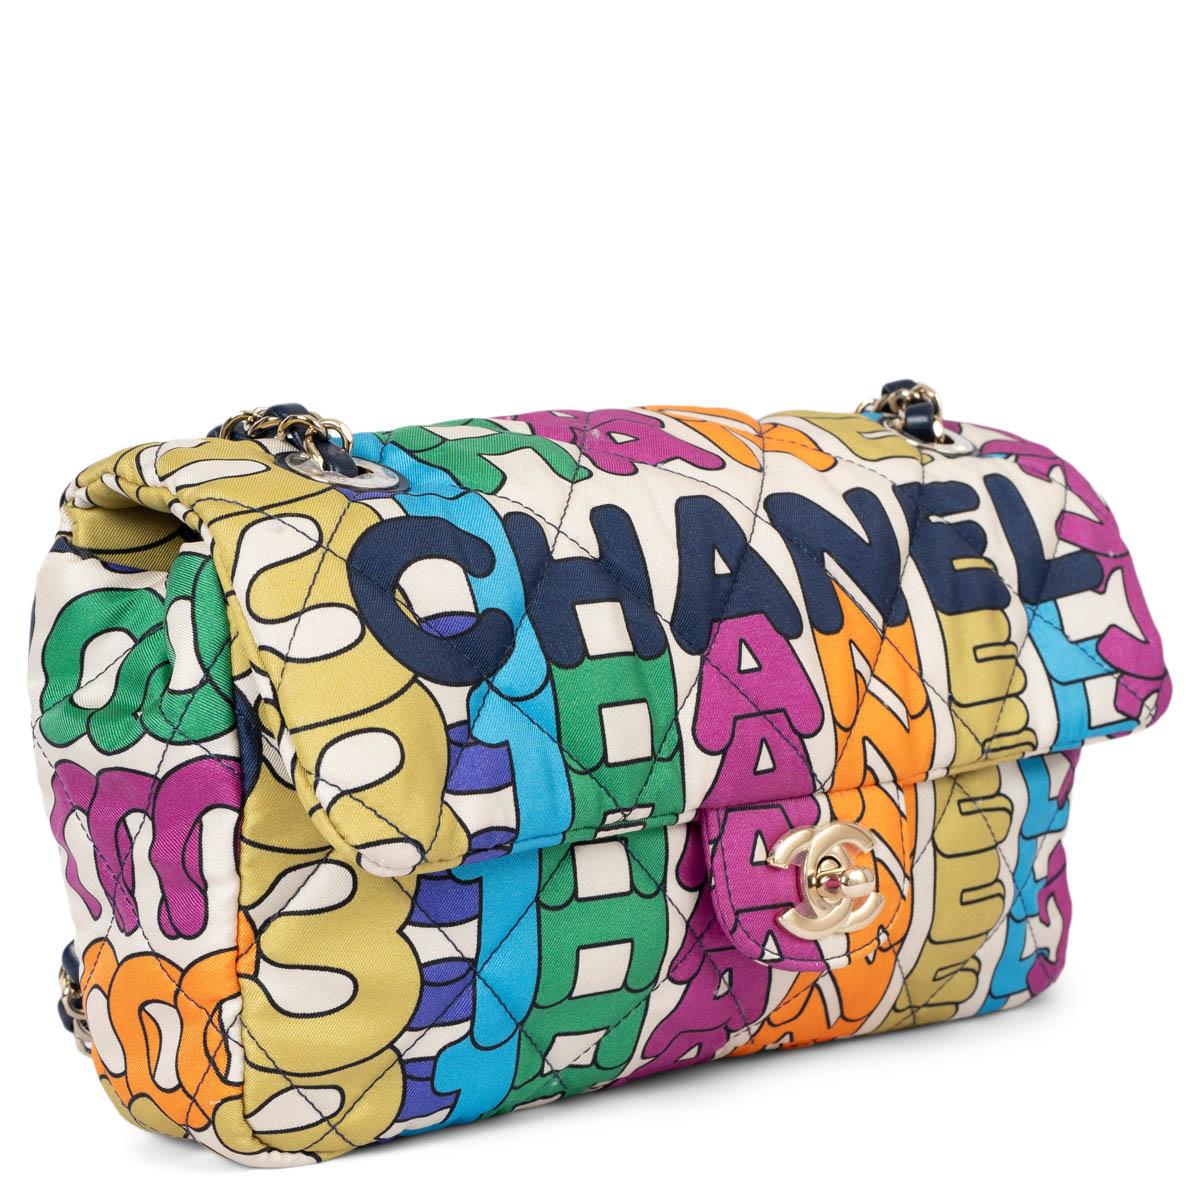 100% authentic Chanel flap bag in rainbow logo pinted silk satin featuring light gold-tone hardware and classic CC turn-lock. The design features navy blue leather and metal chain-link shoulder strap and is lined in navy blue quilted grosgrain with